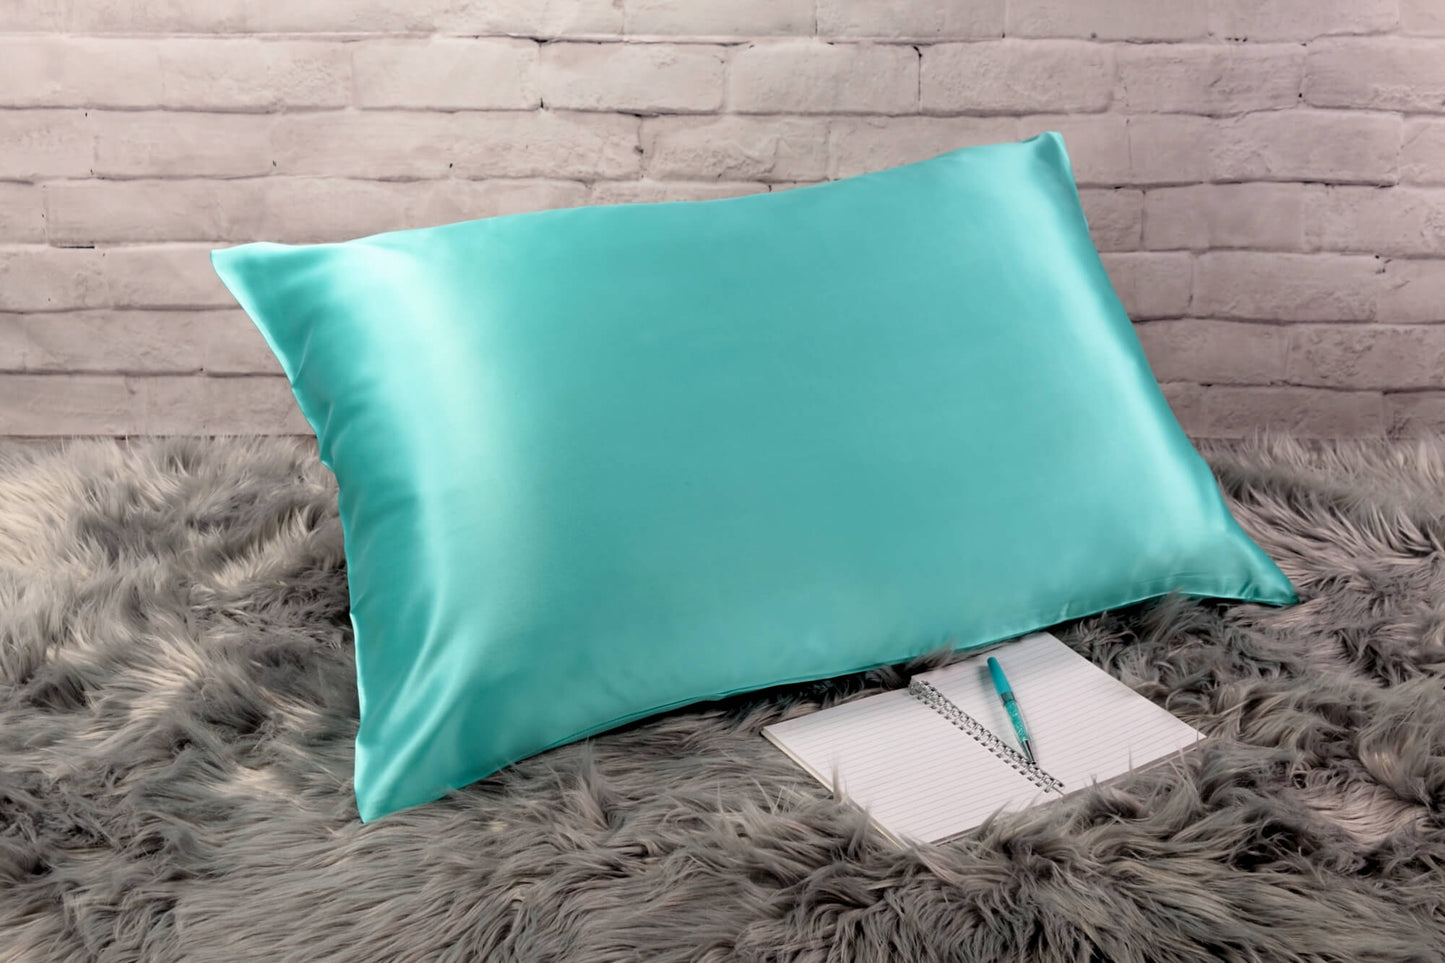 Celestial Silk Aqua 25 momme Silk Pillowcase on rug with notebook and pretty pen